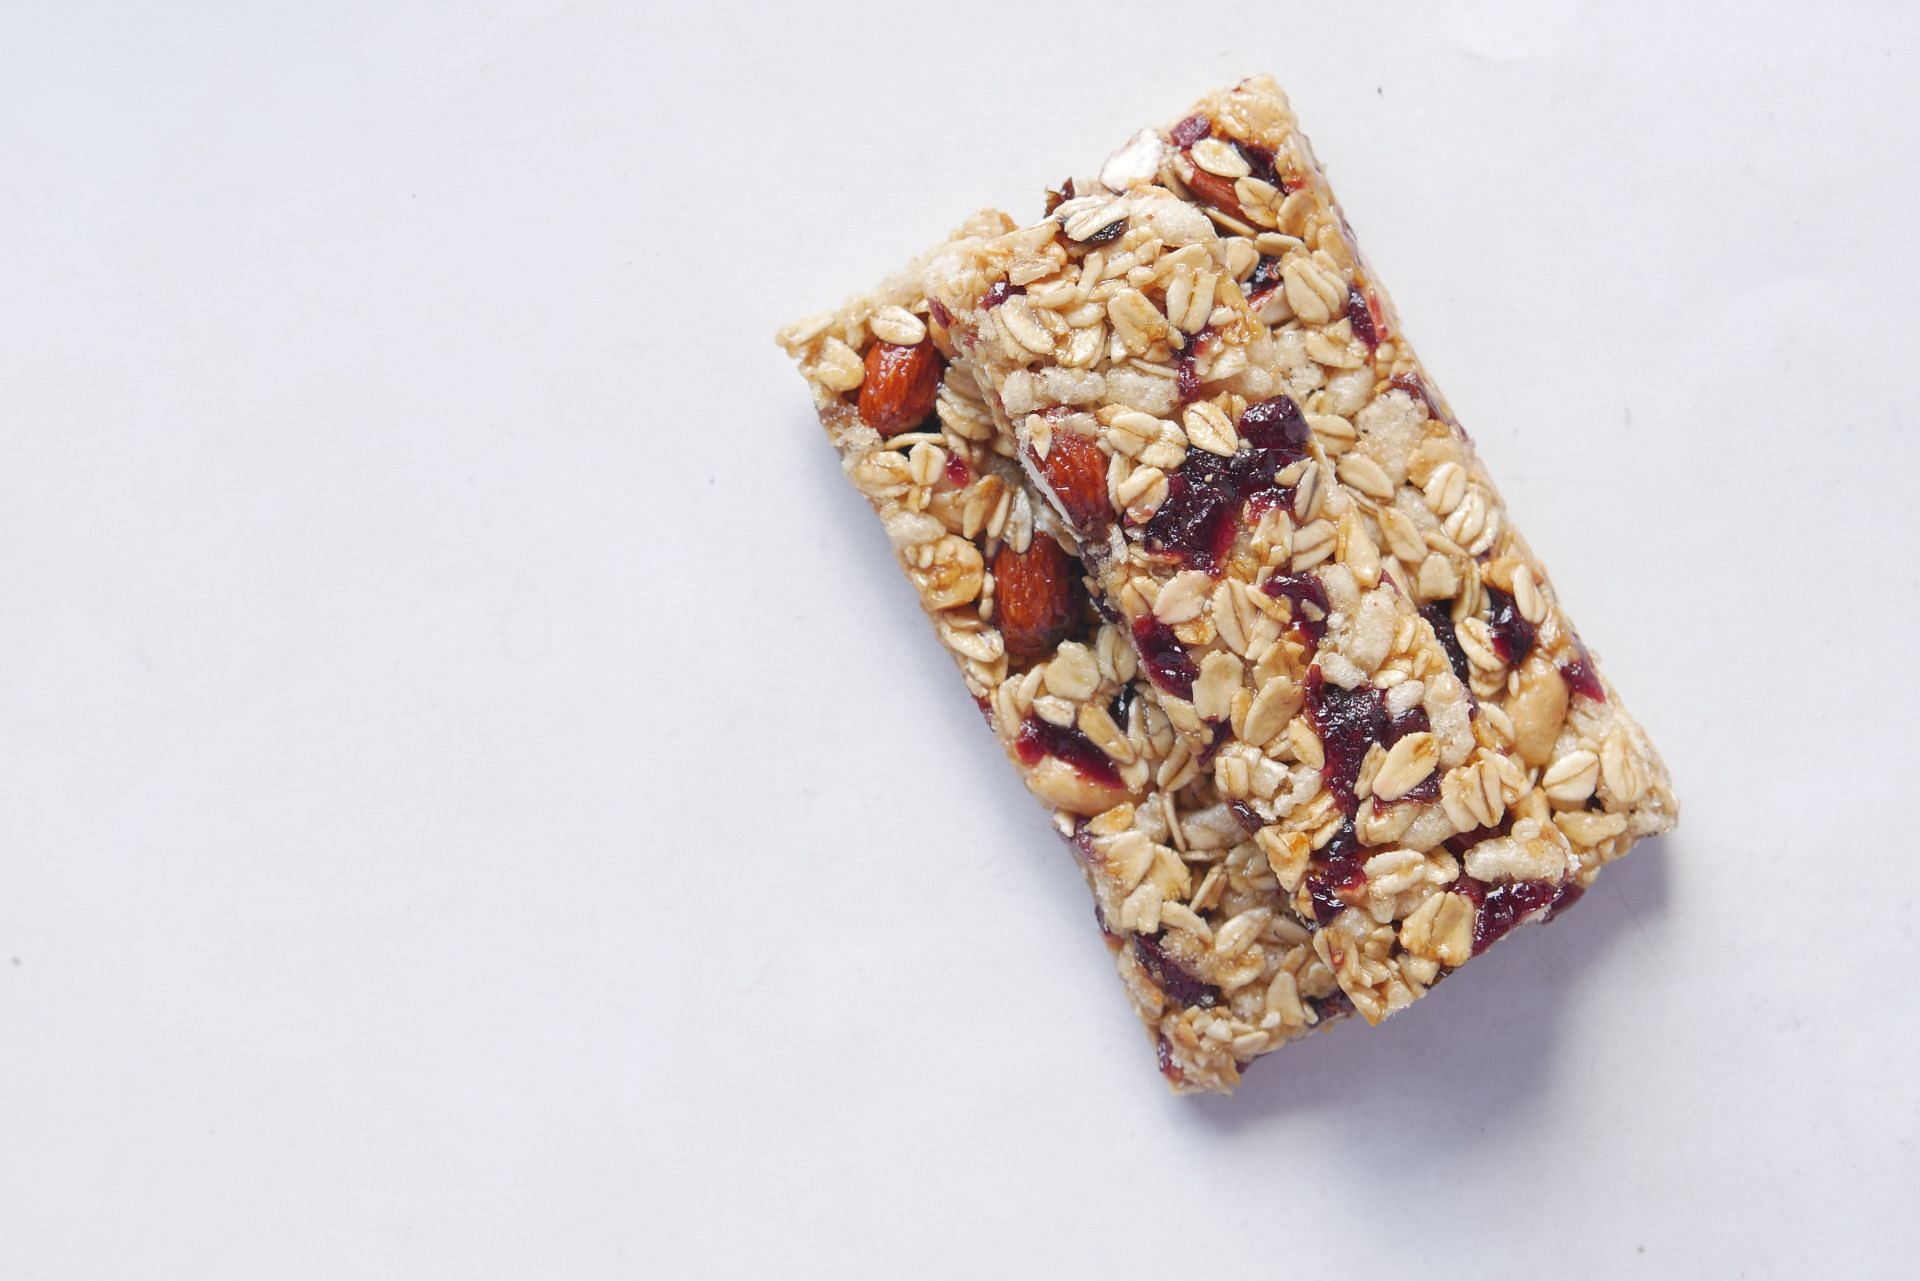 Protein bars are a great way to add more protein to your diet without eating heavy meals! (Image via unsplash/Towfiqu Barbhuiya)